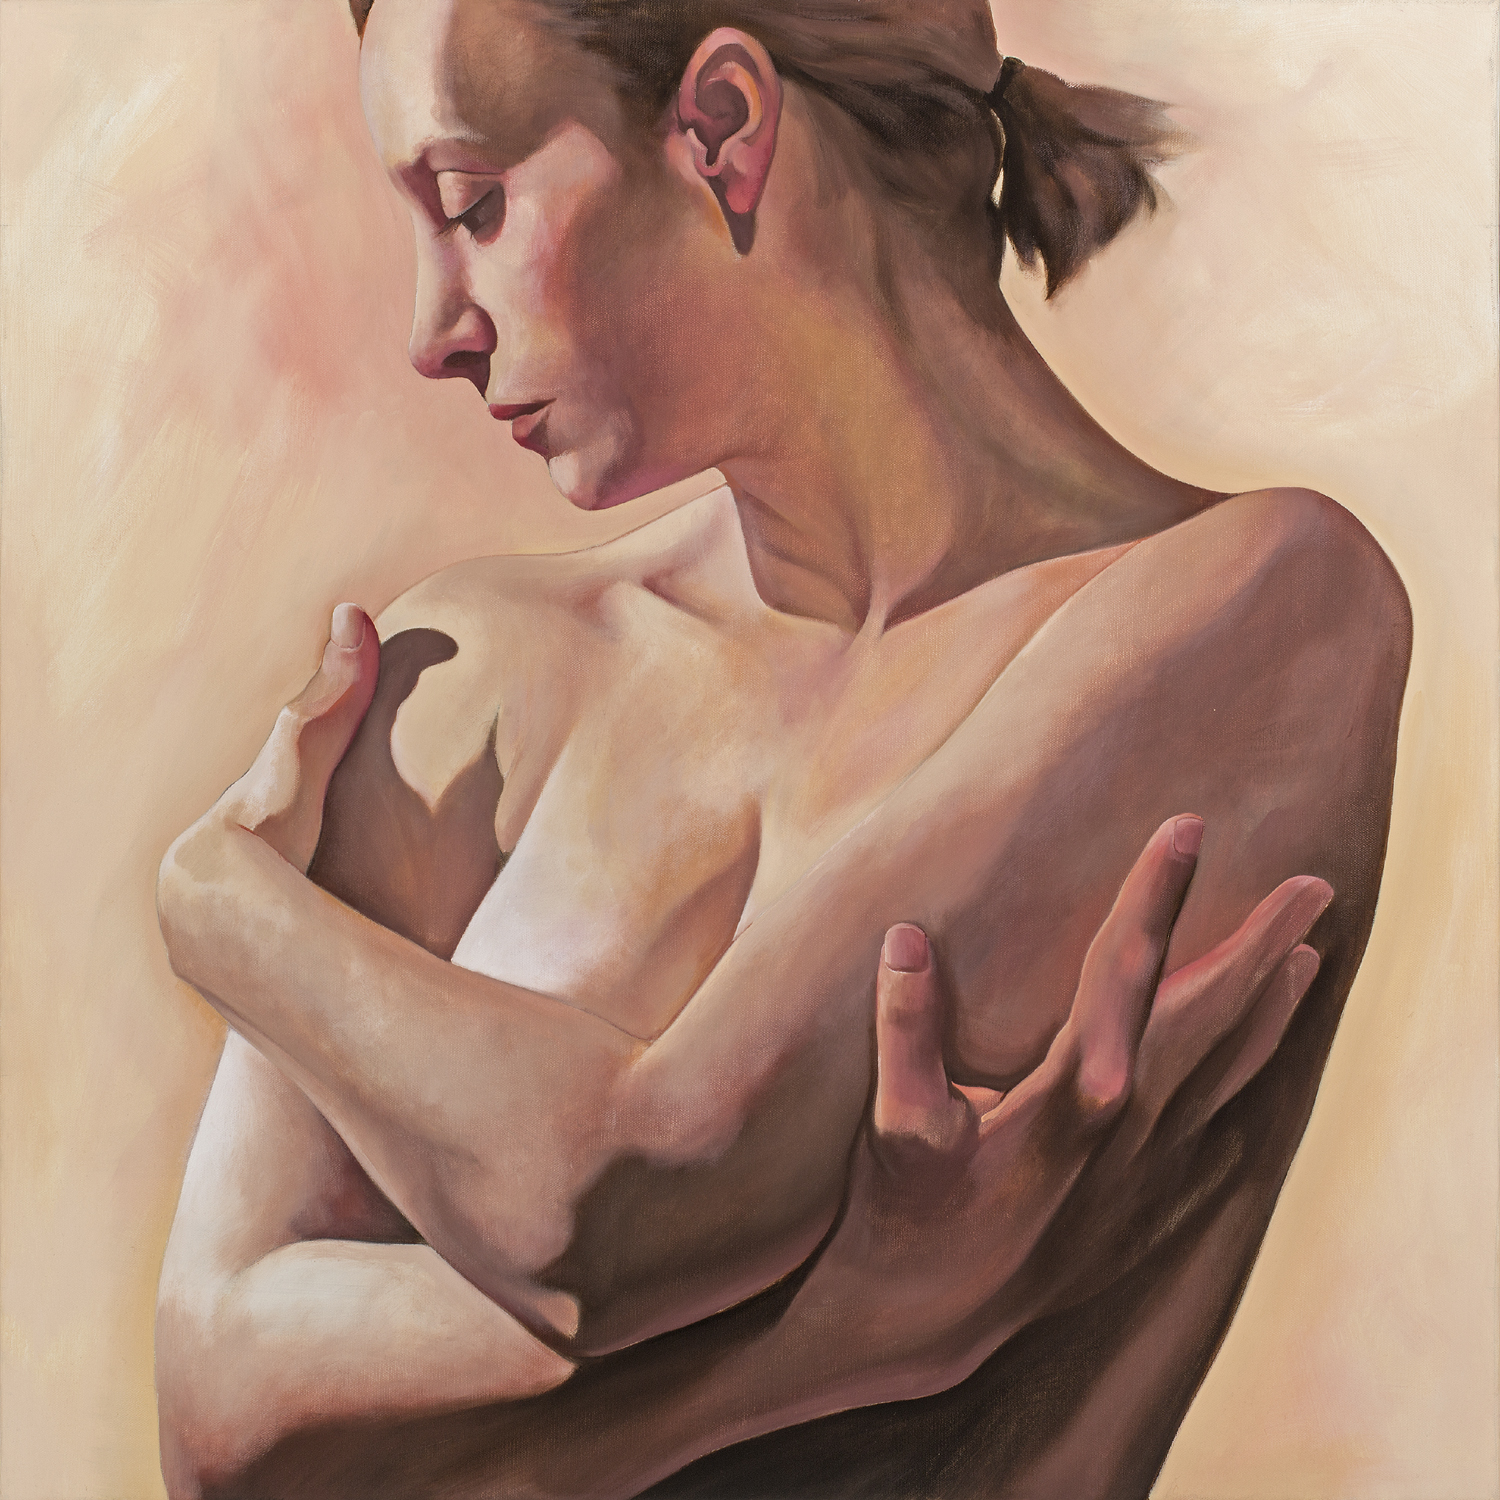 "Acceptance" by Figurative Artist Daryl Zang in Becoming, presented by Elisa Contemporary Art